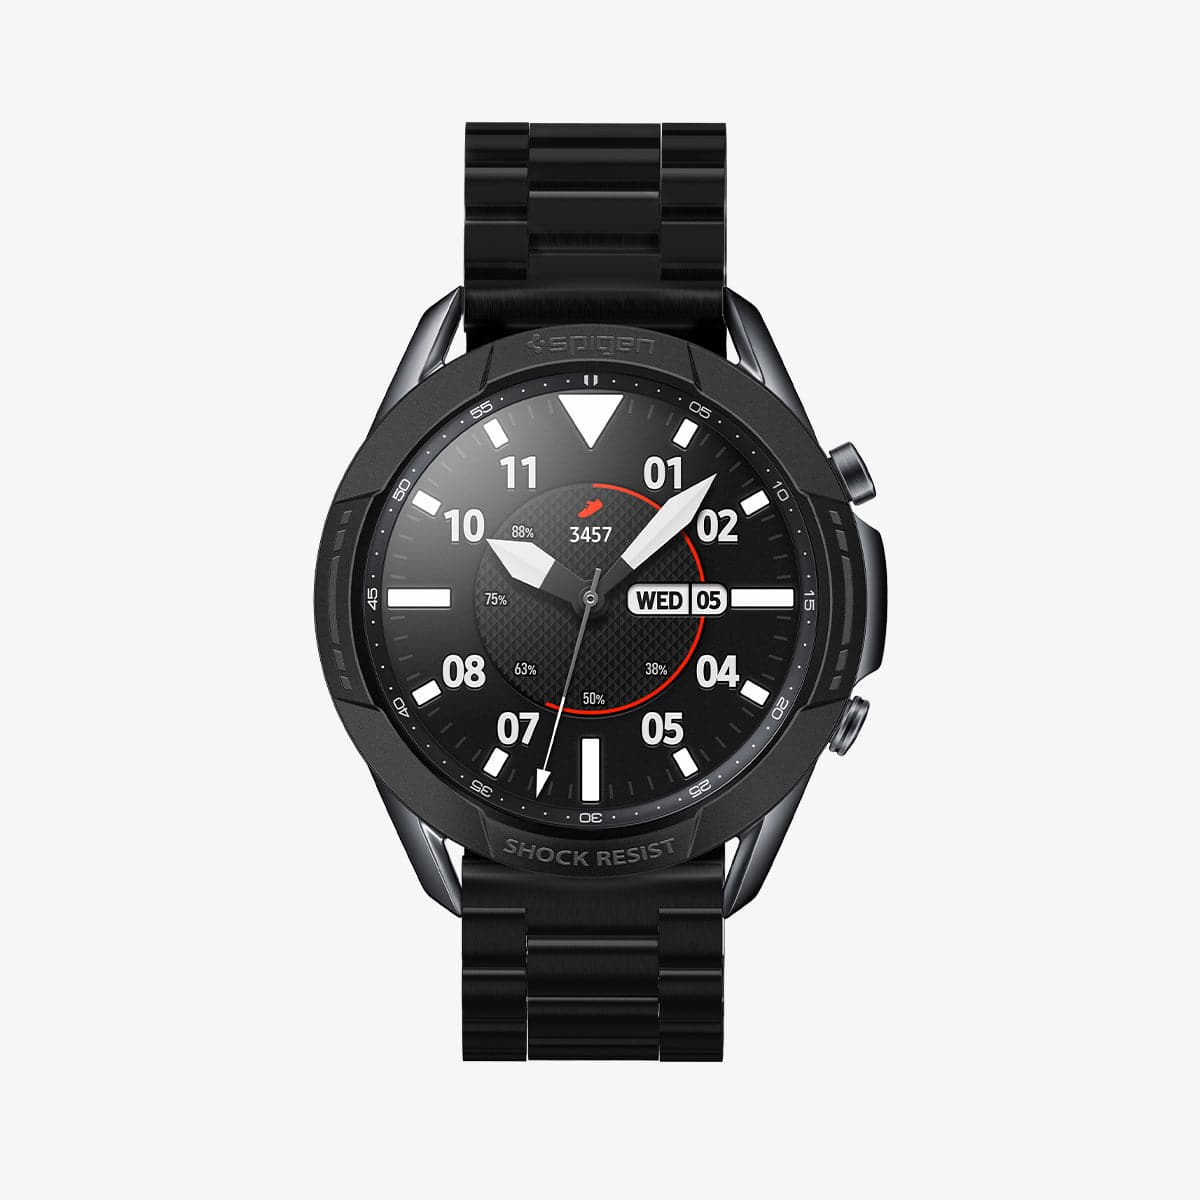 AMP02238 - Galaxy Watch 3 (45mm) Chrono Shield in black showing the front